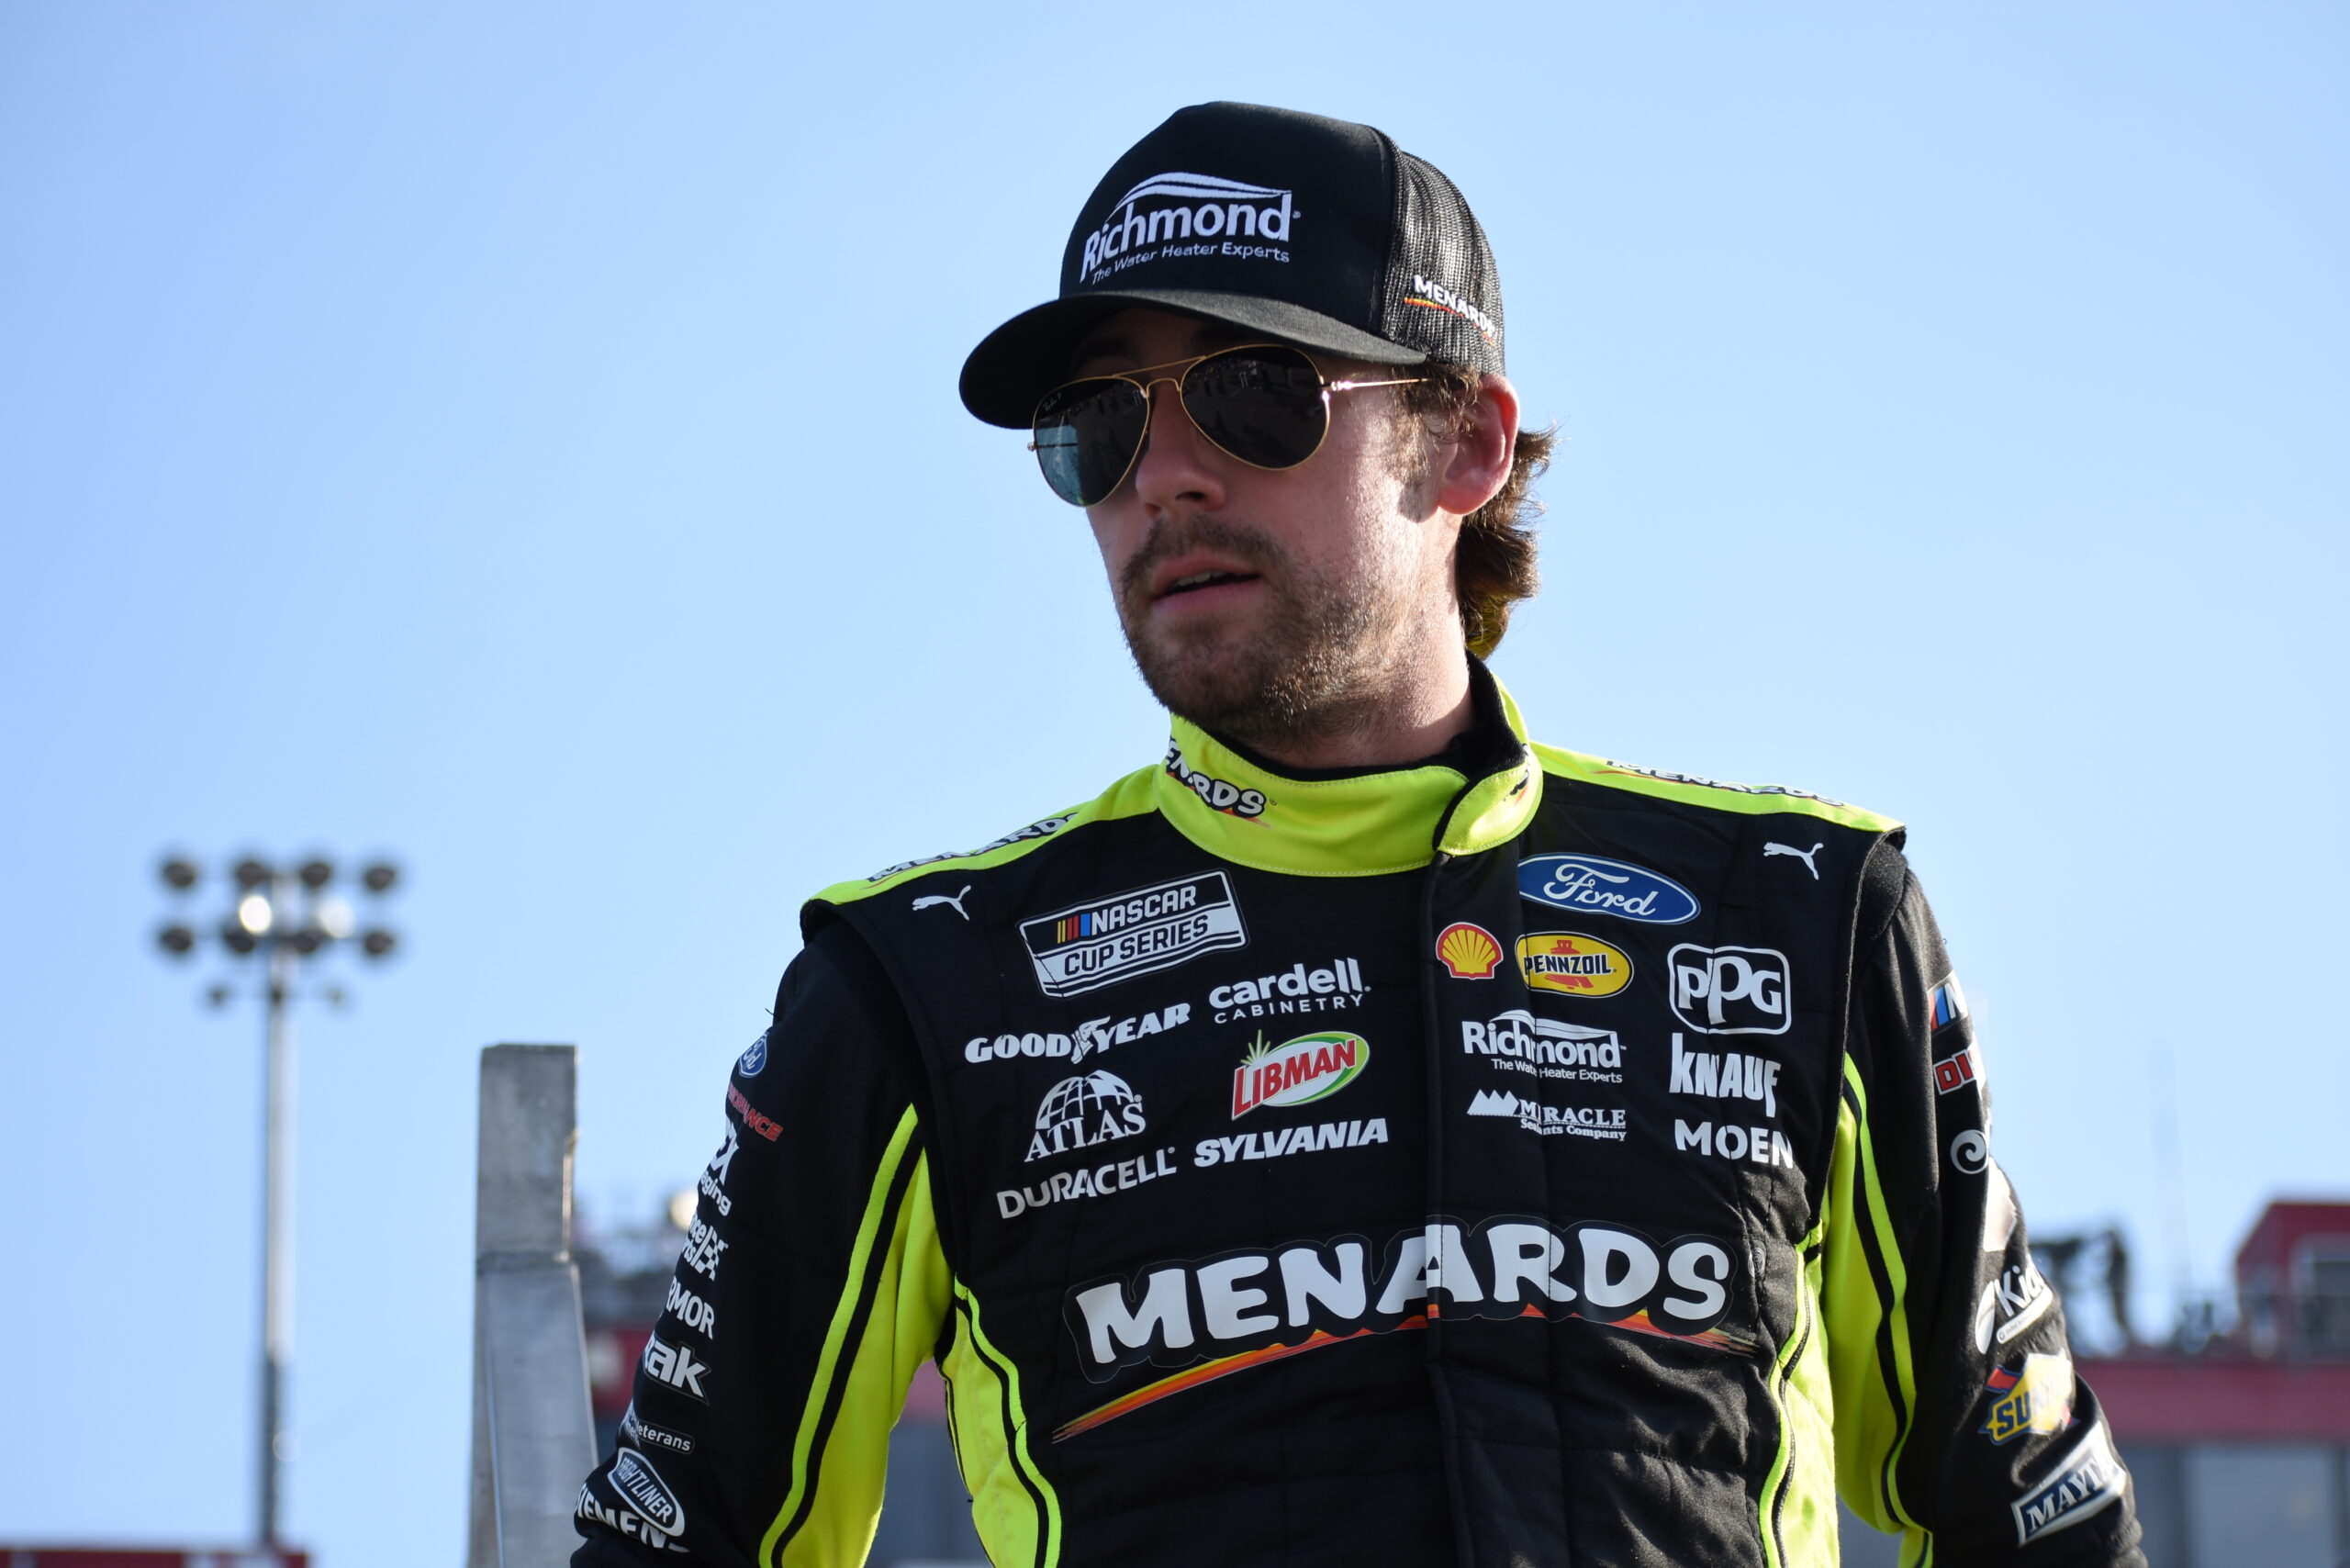 "It’s just all about putting together 10 solid races and trying to transfer in between the rounds." - Ryan Blaney (Photo: Michael Guariglia | The Podium Finish)